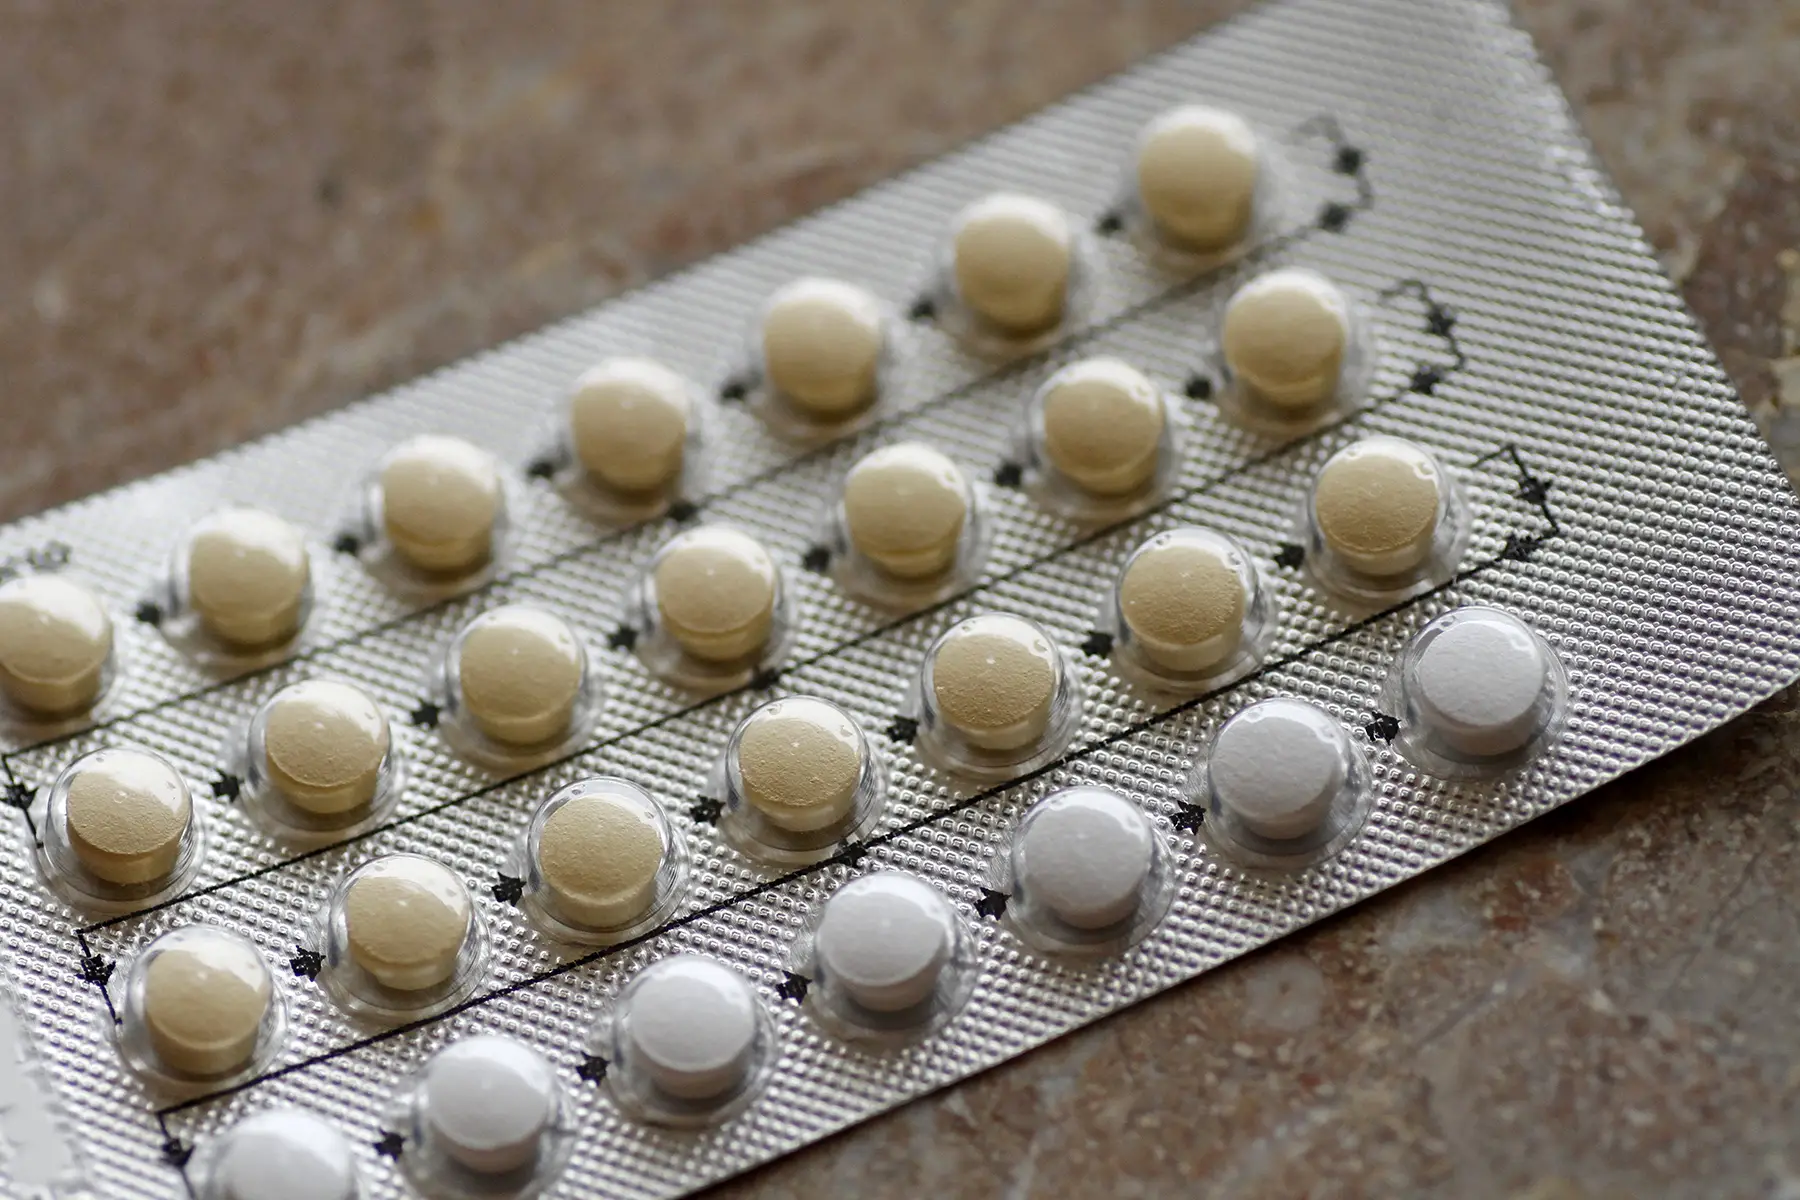 A package of contraceptive pills